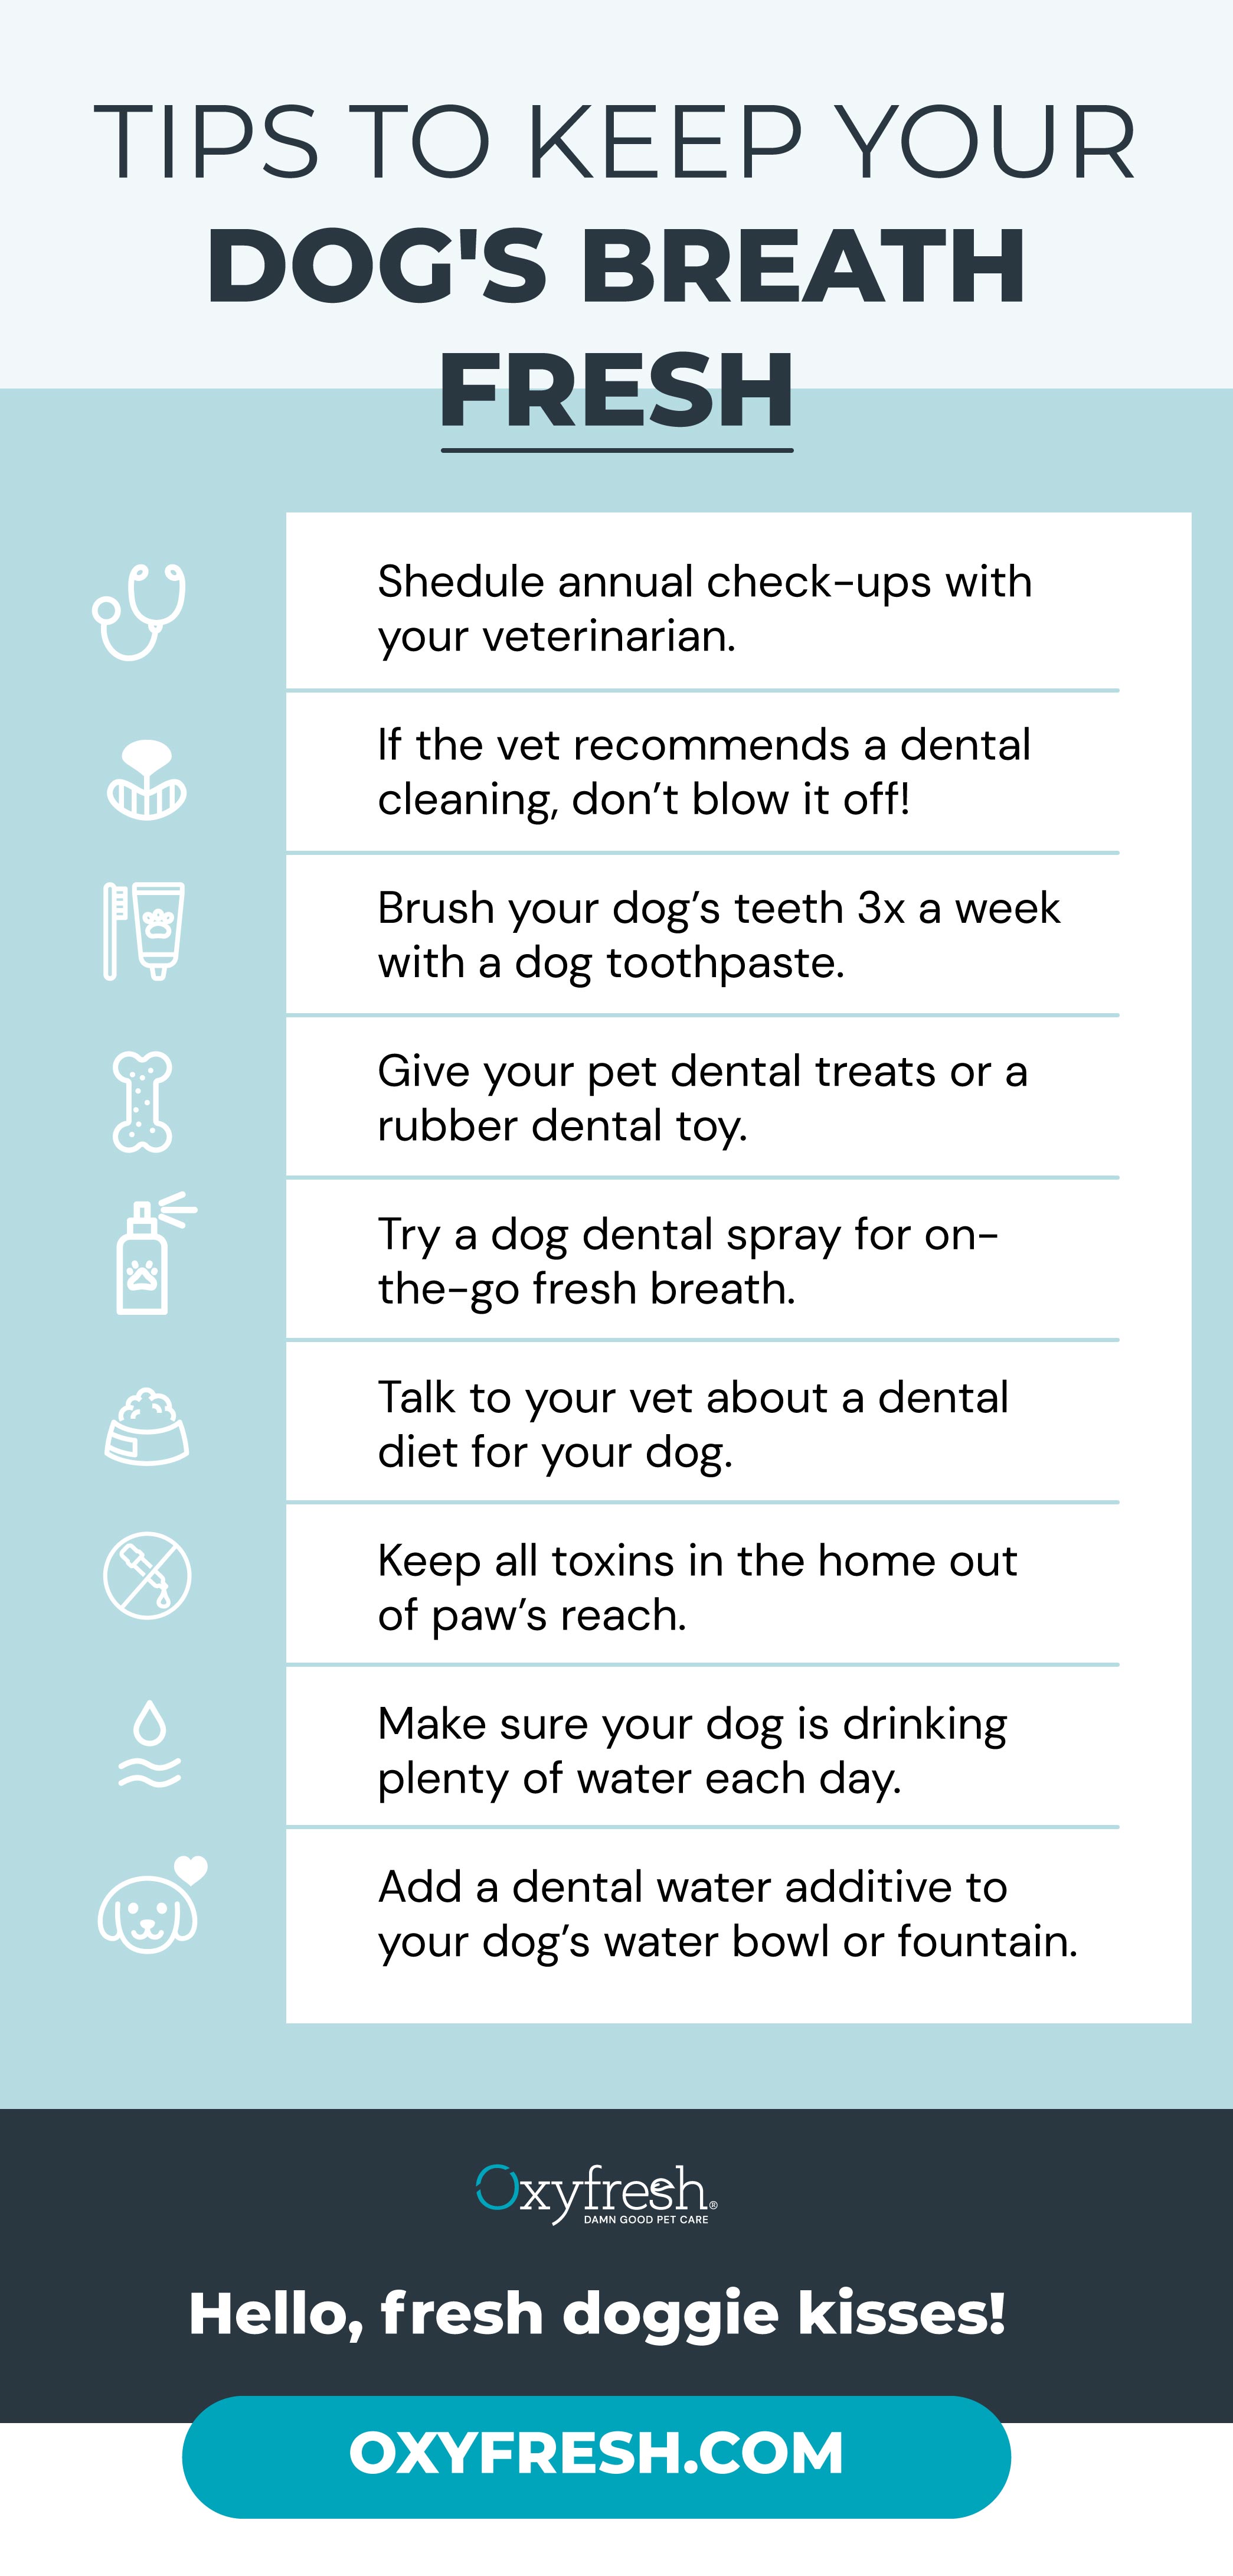 tips to keep your dogs breath fresh include vet checkups cleaning brushing toys and treats spray diets hydration and water additives visit the oxyfresh website